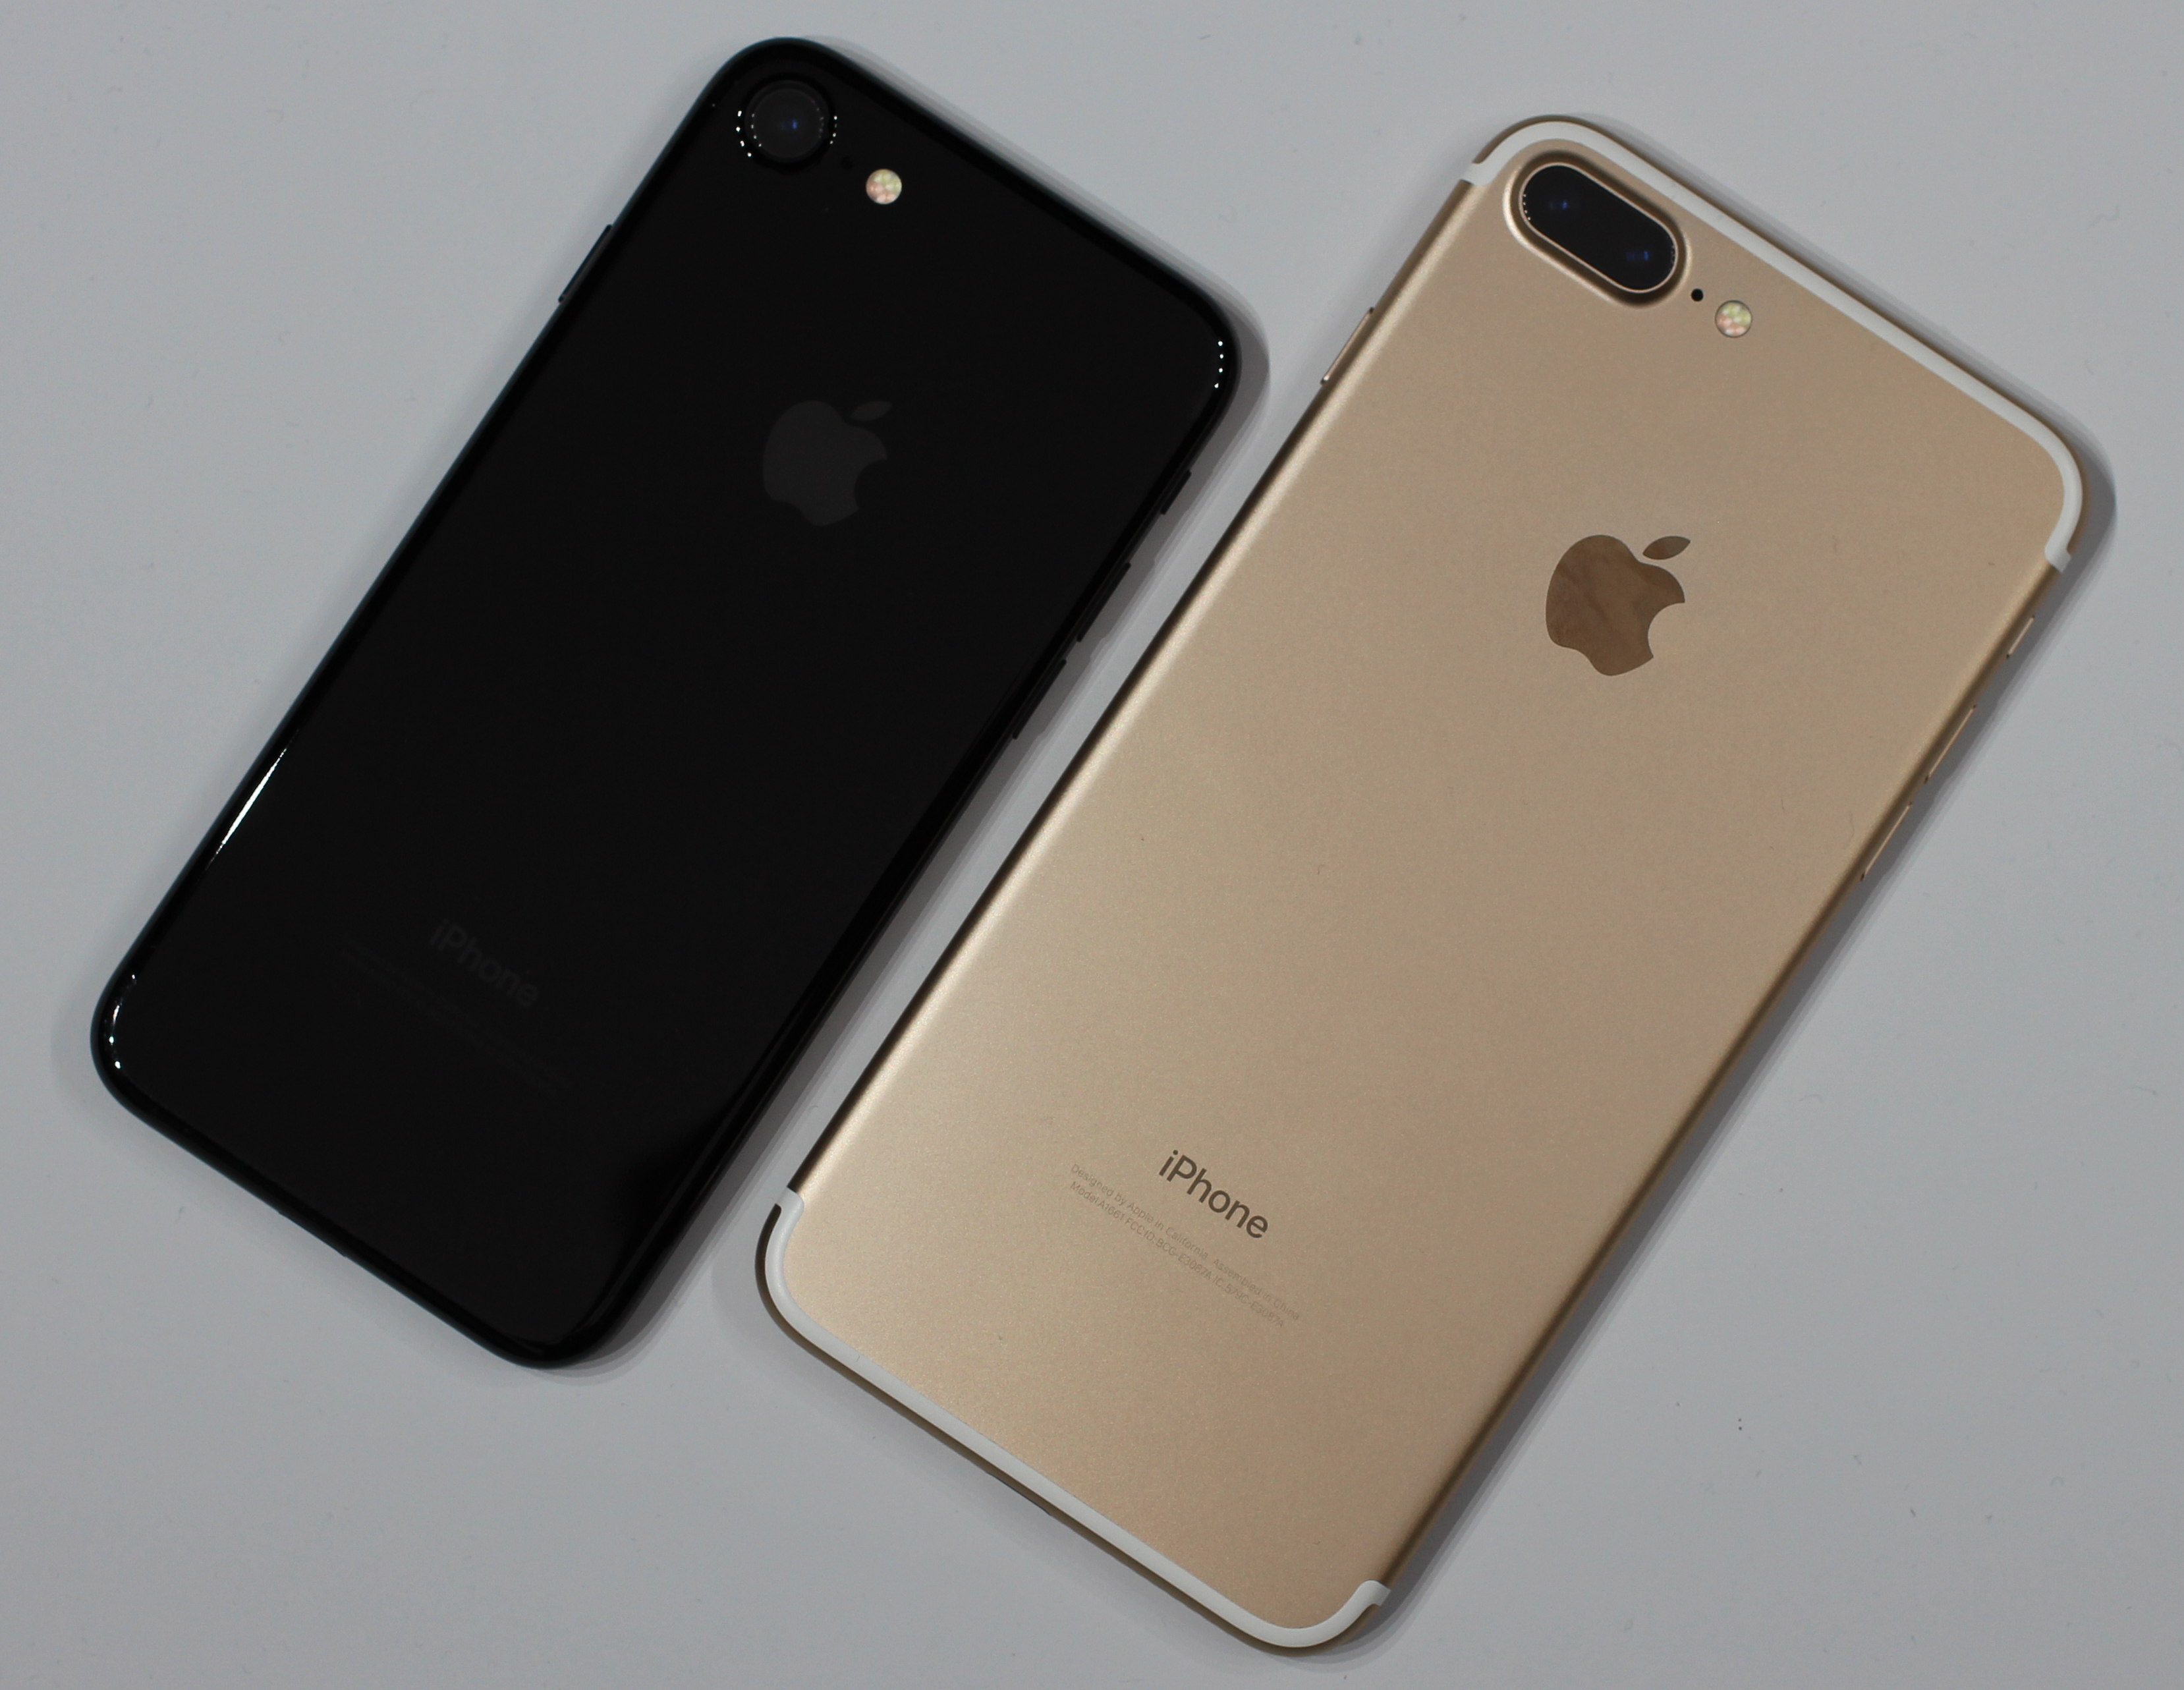 File:IPhone 7 and iPhone 7 Plus.jpg - Wikimedia Commons